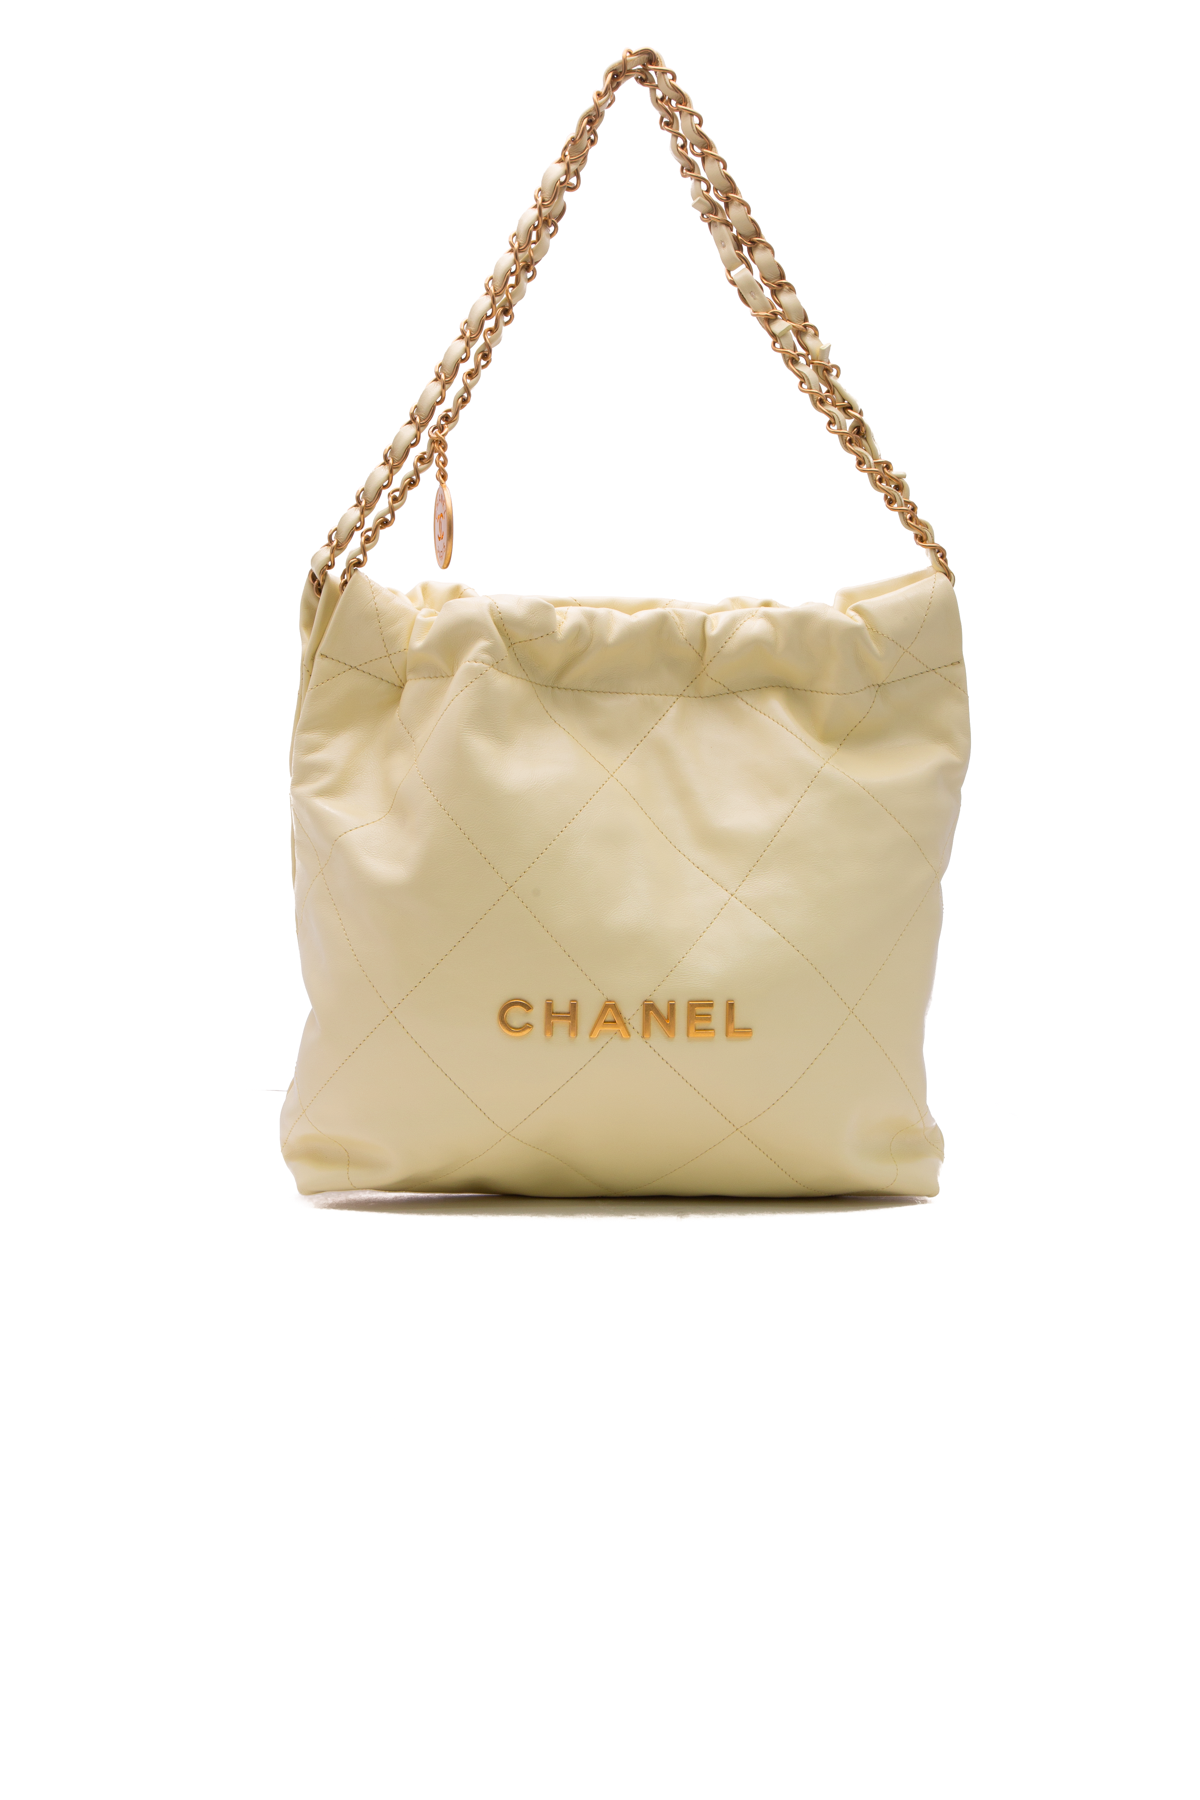 Exceptional Chanel 'Diamond Forever' Flap Bag sparkles in New York